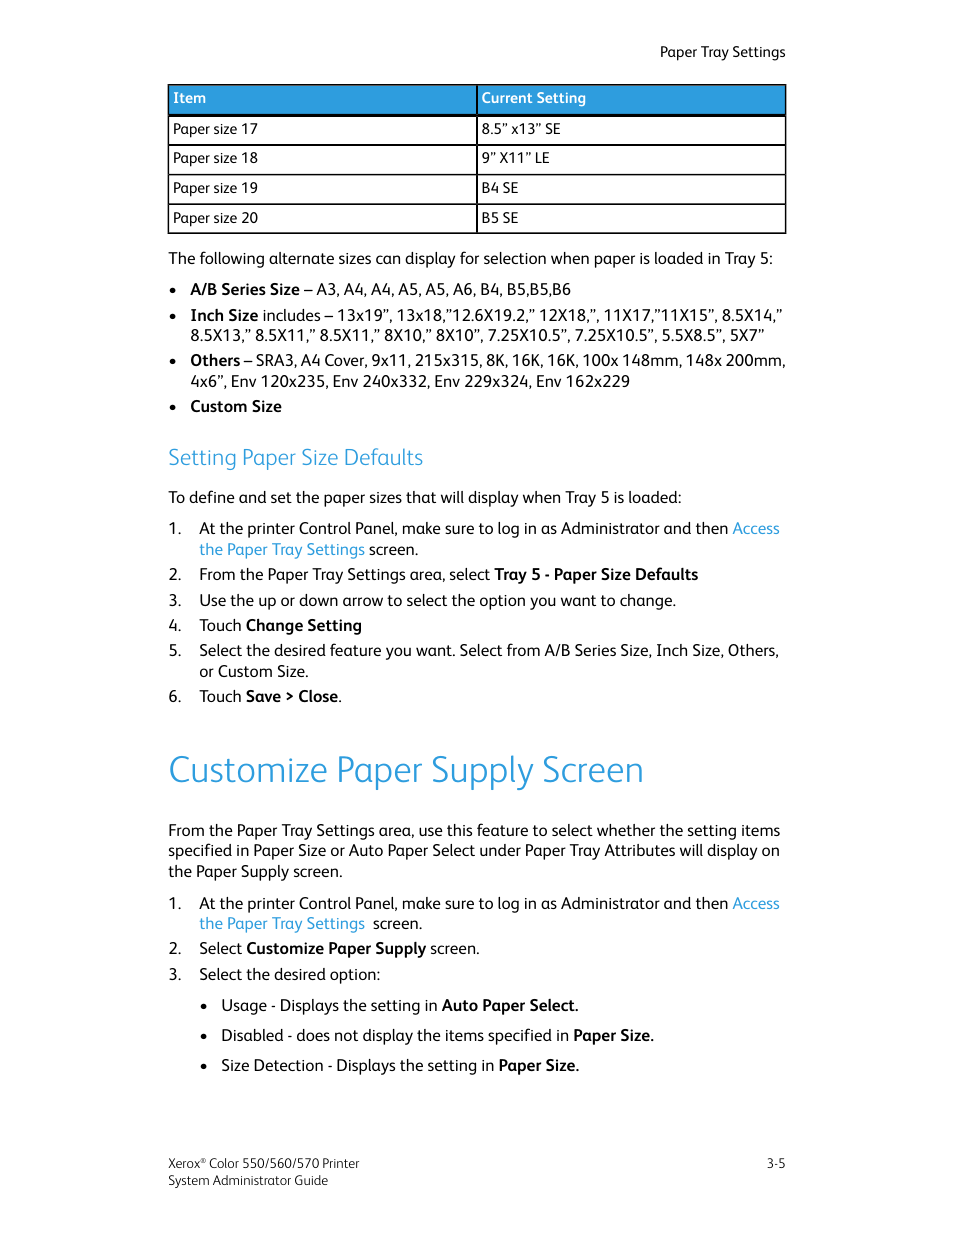 Setting Paper Size Defaults Customize Paper Supply Screen